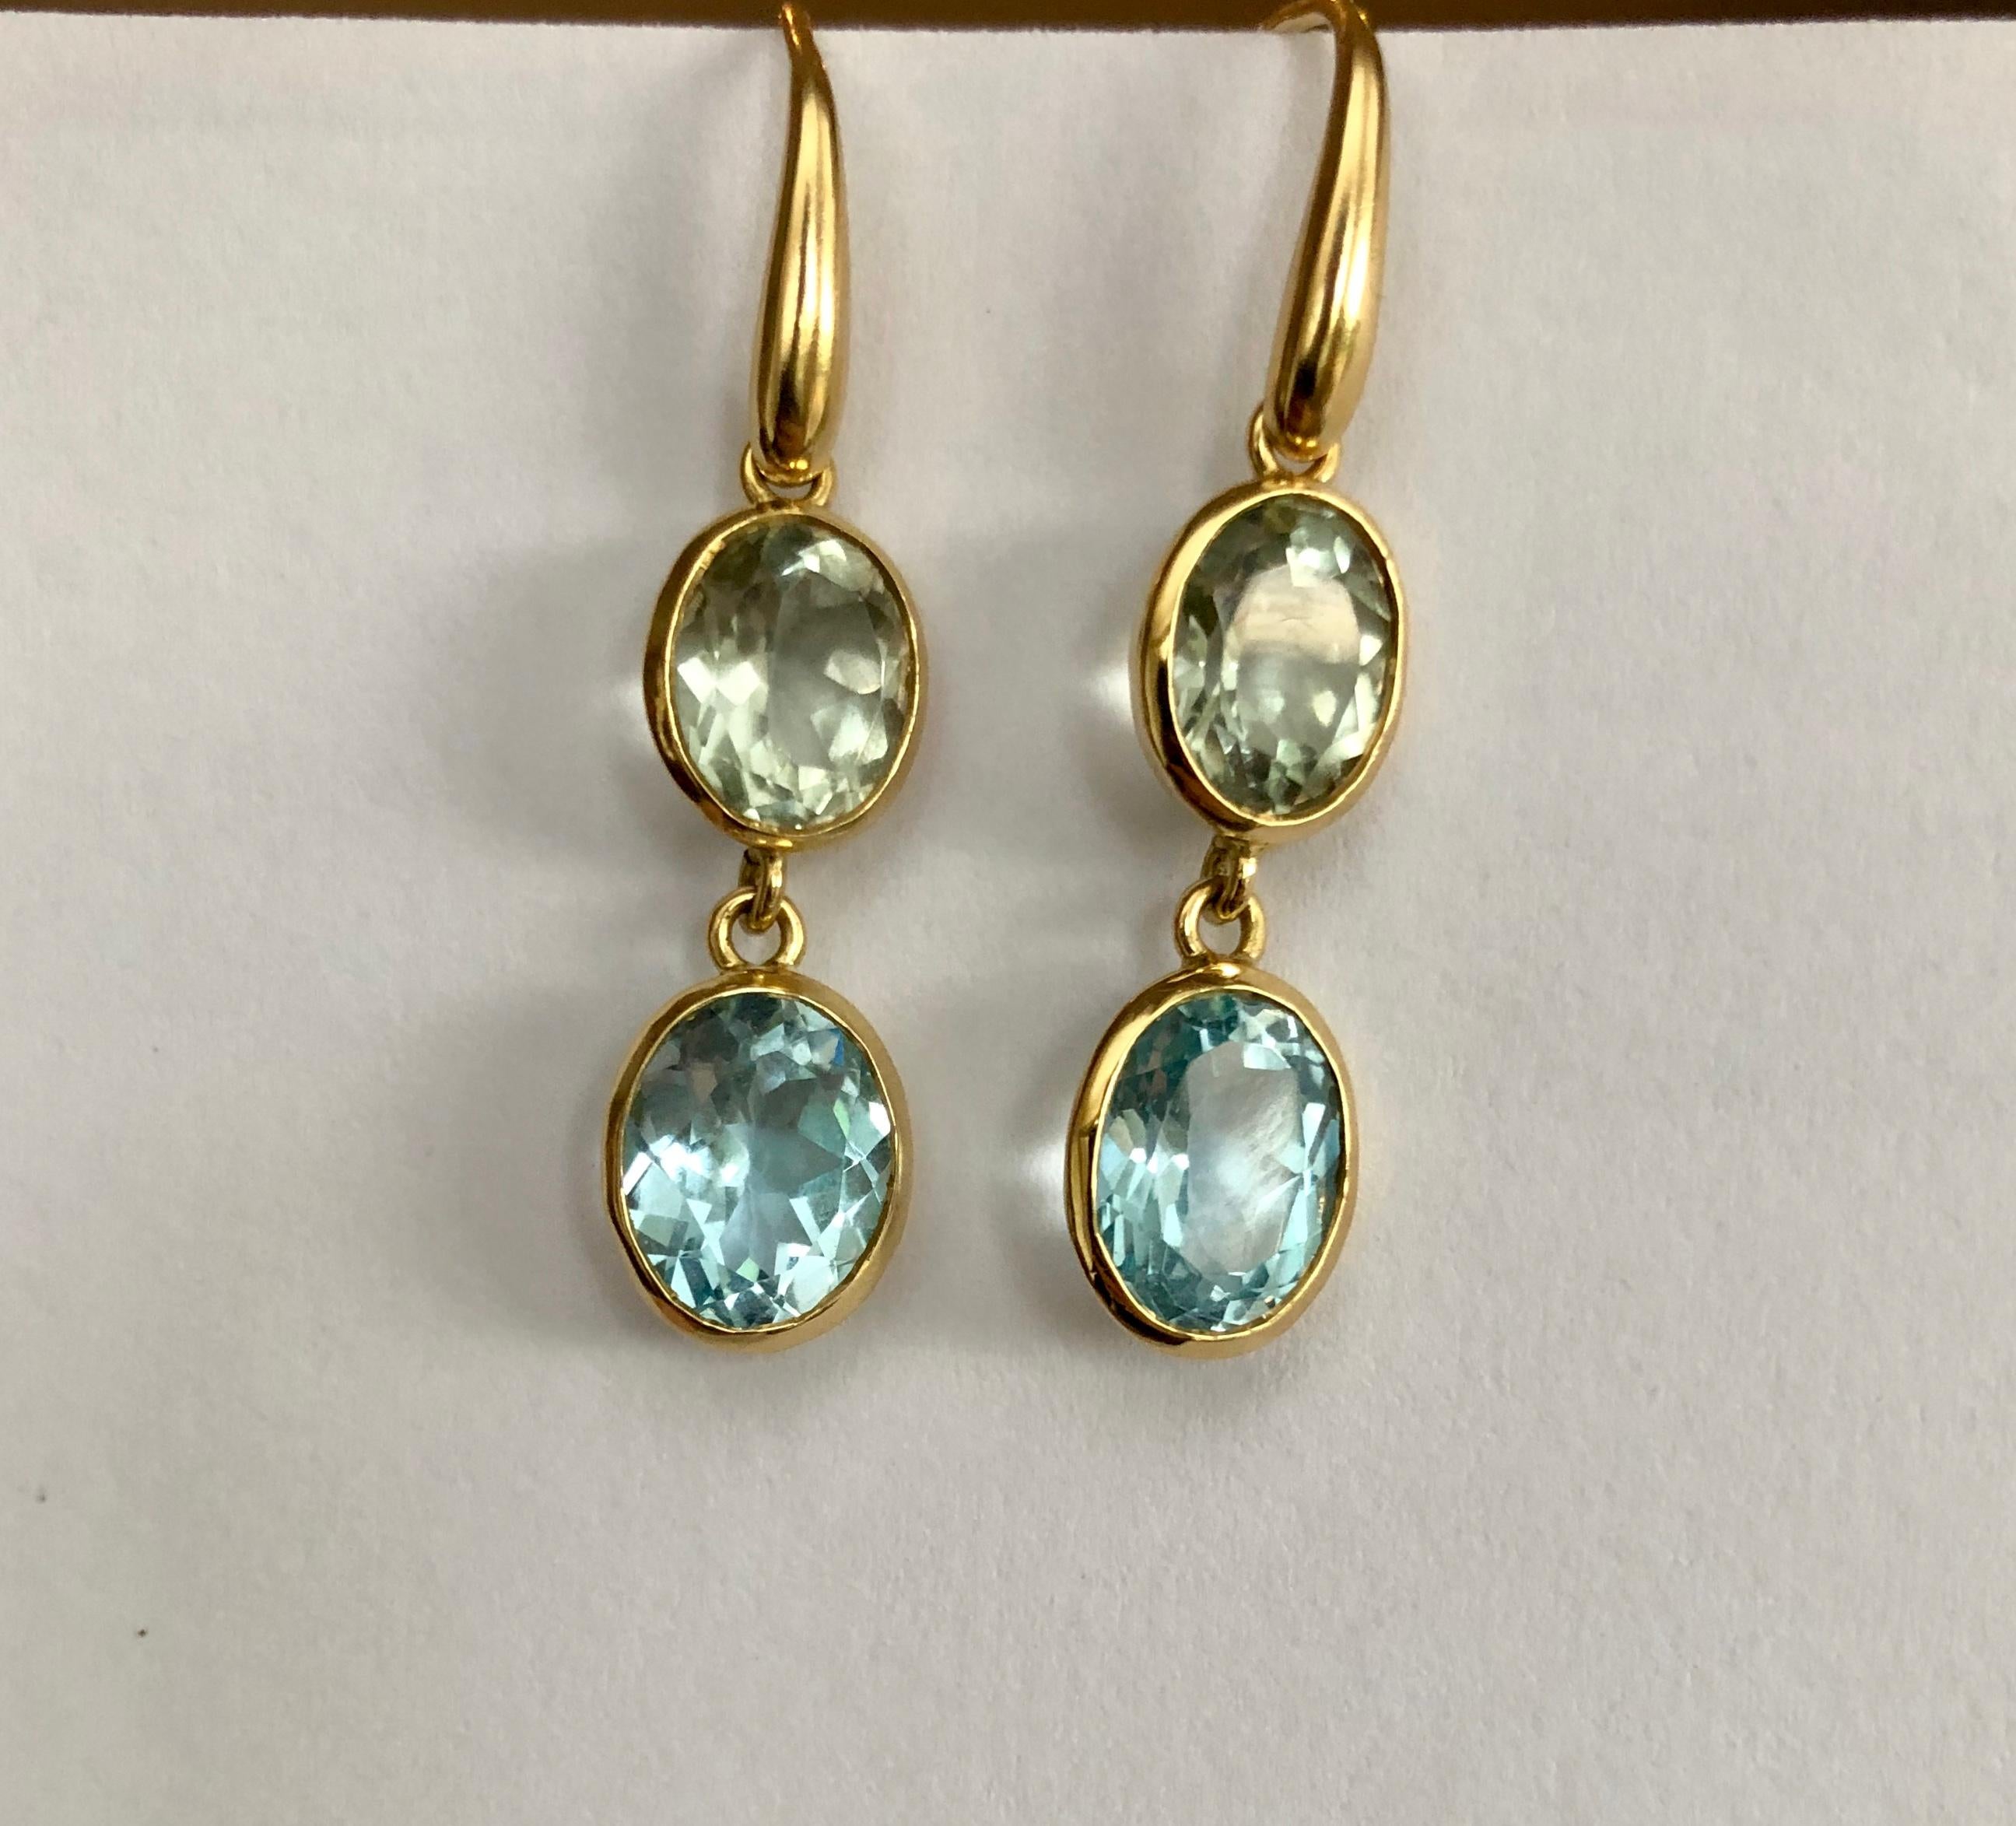 Indian Ocean Earrings - Stylish and elegant this stunning pair of earrings is made from 18kt yellow gold and semi precious stones. Designed and carefully hand crafted in the UK.

18 karat yellow gold
6.4 grams 
Blue Topaz & Prasiolite (green